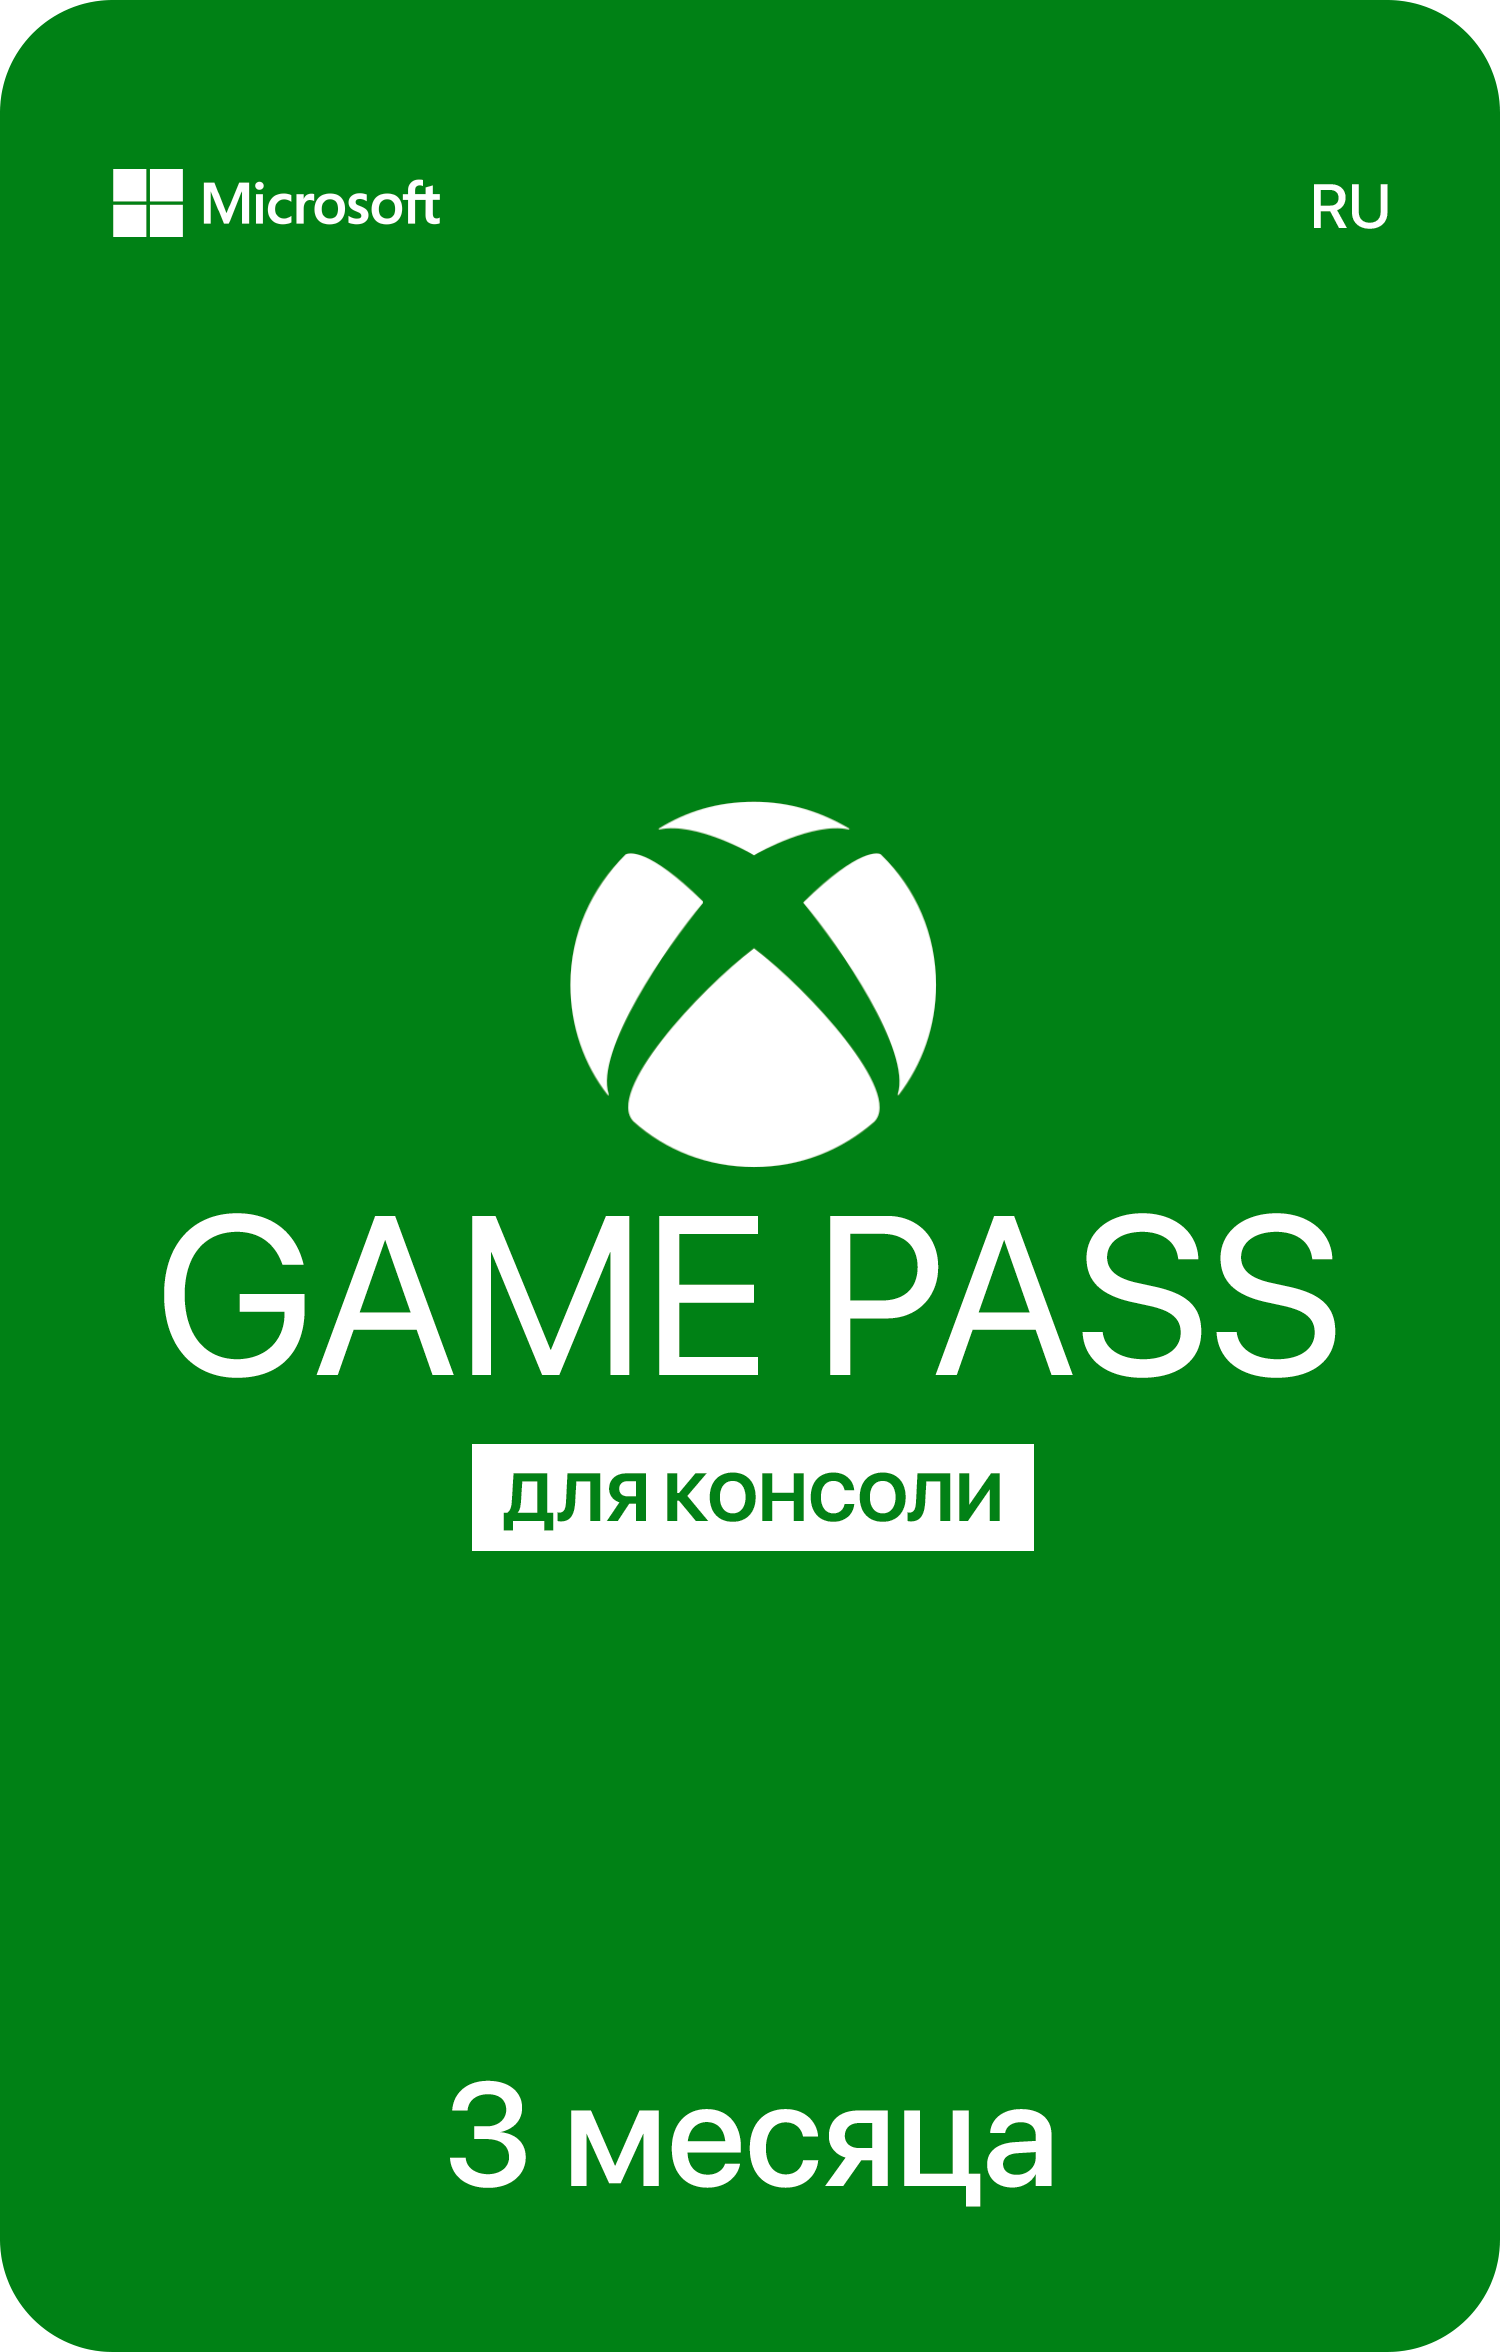 XBOX GAME PASS: 3 MONTHS + GIFT 🎁